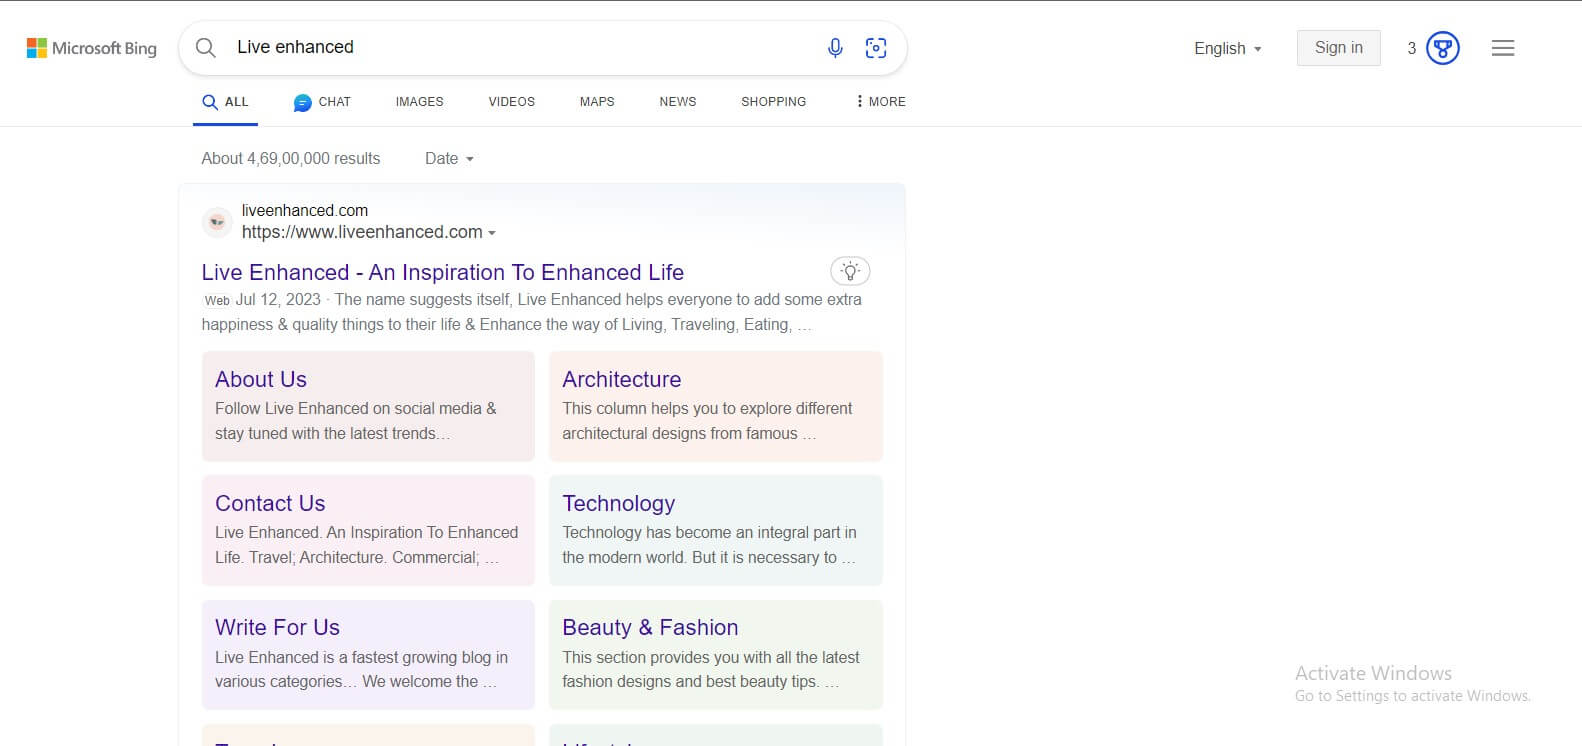 Bing search engine Search query "Live Enhanced"